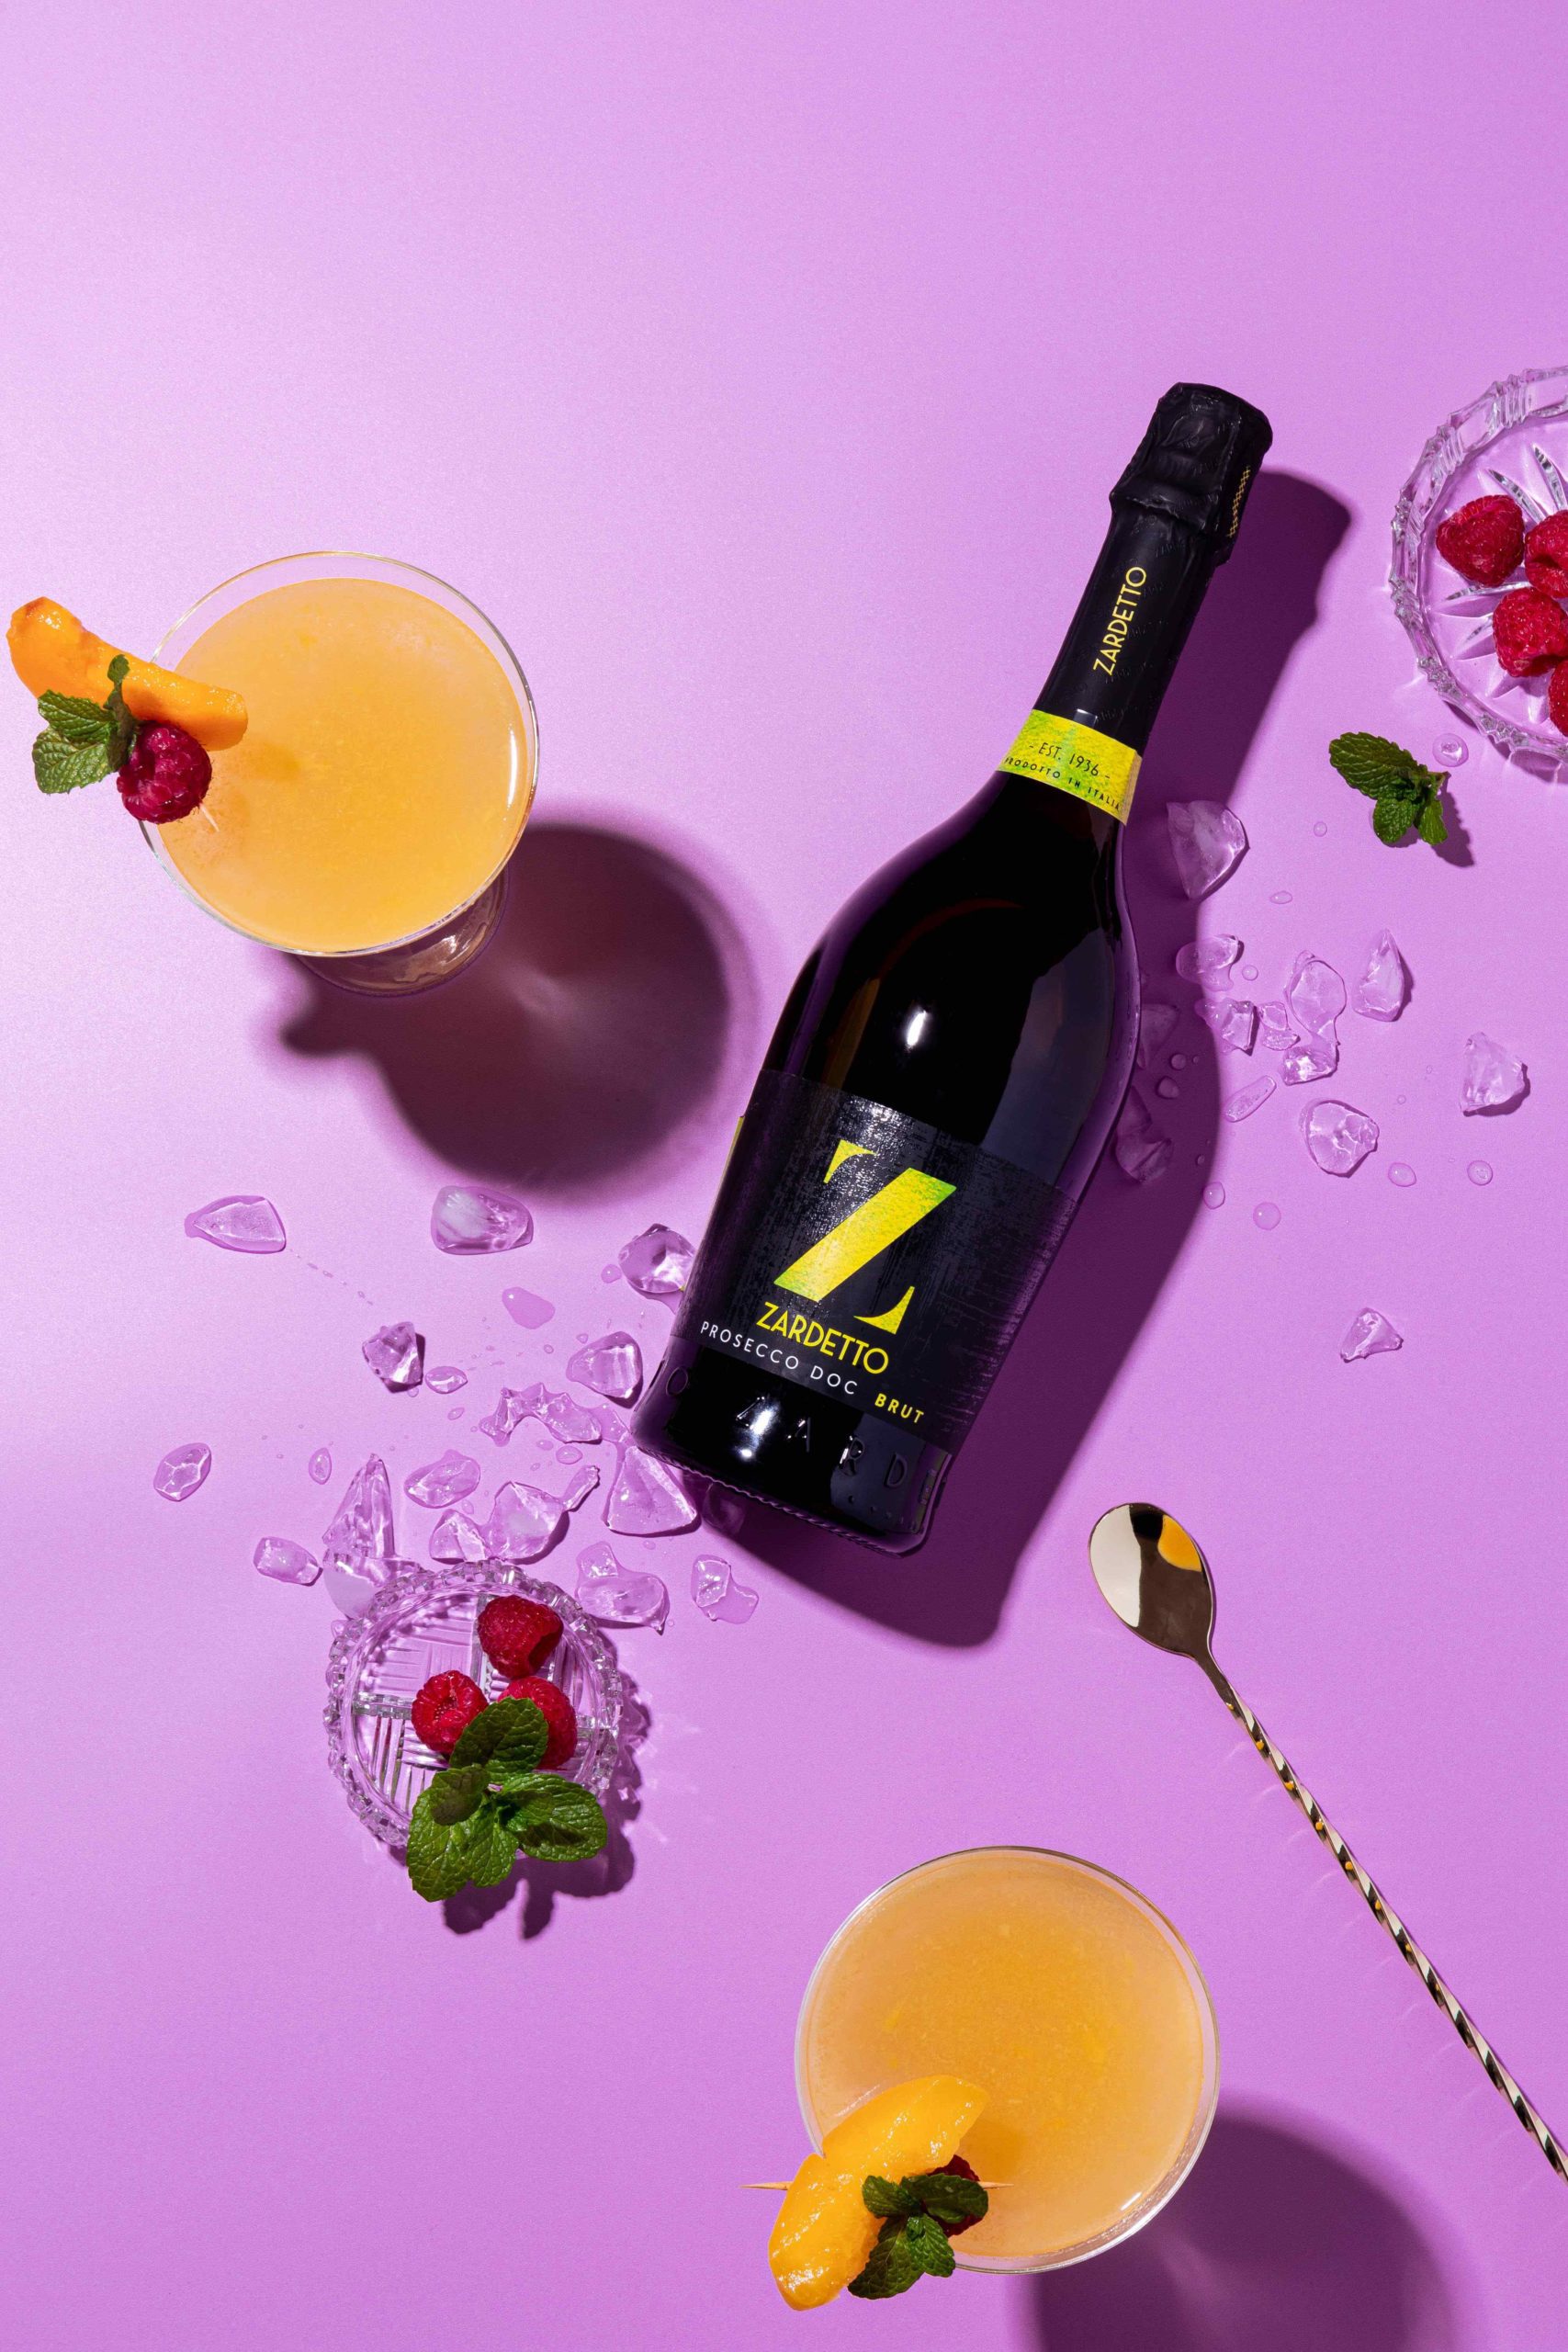 Bottle of Zardetto wine laying on a purple background with cocktails, produced by YesMore Wine Marketing Consultancy